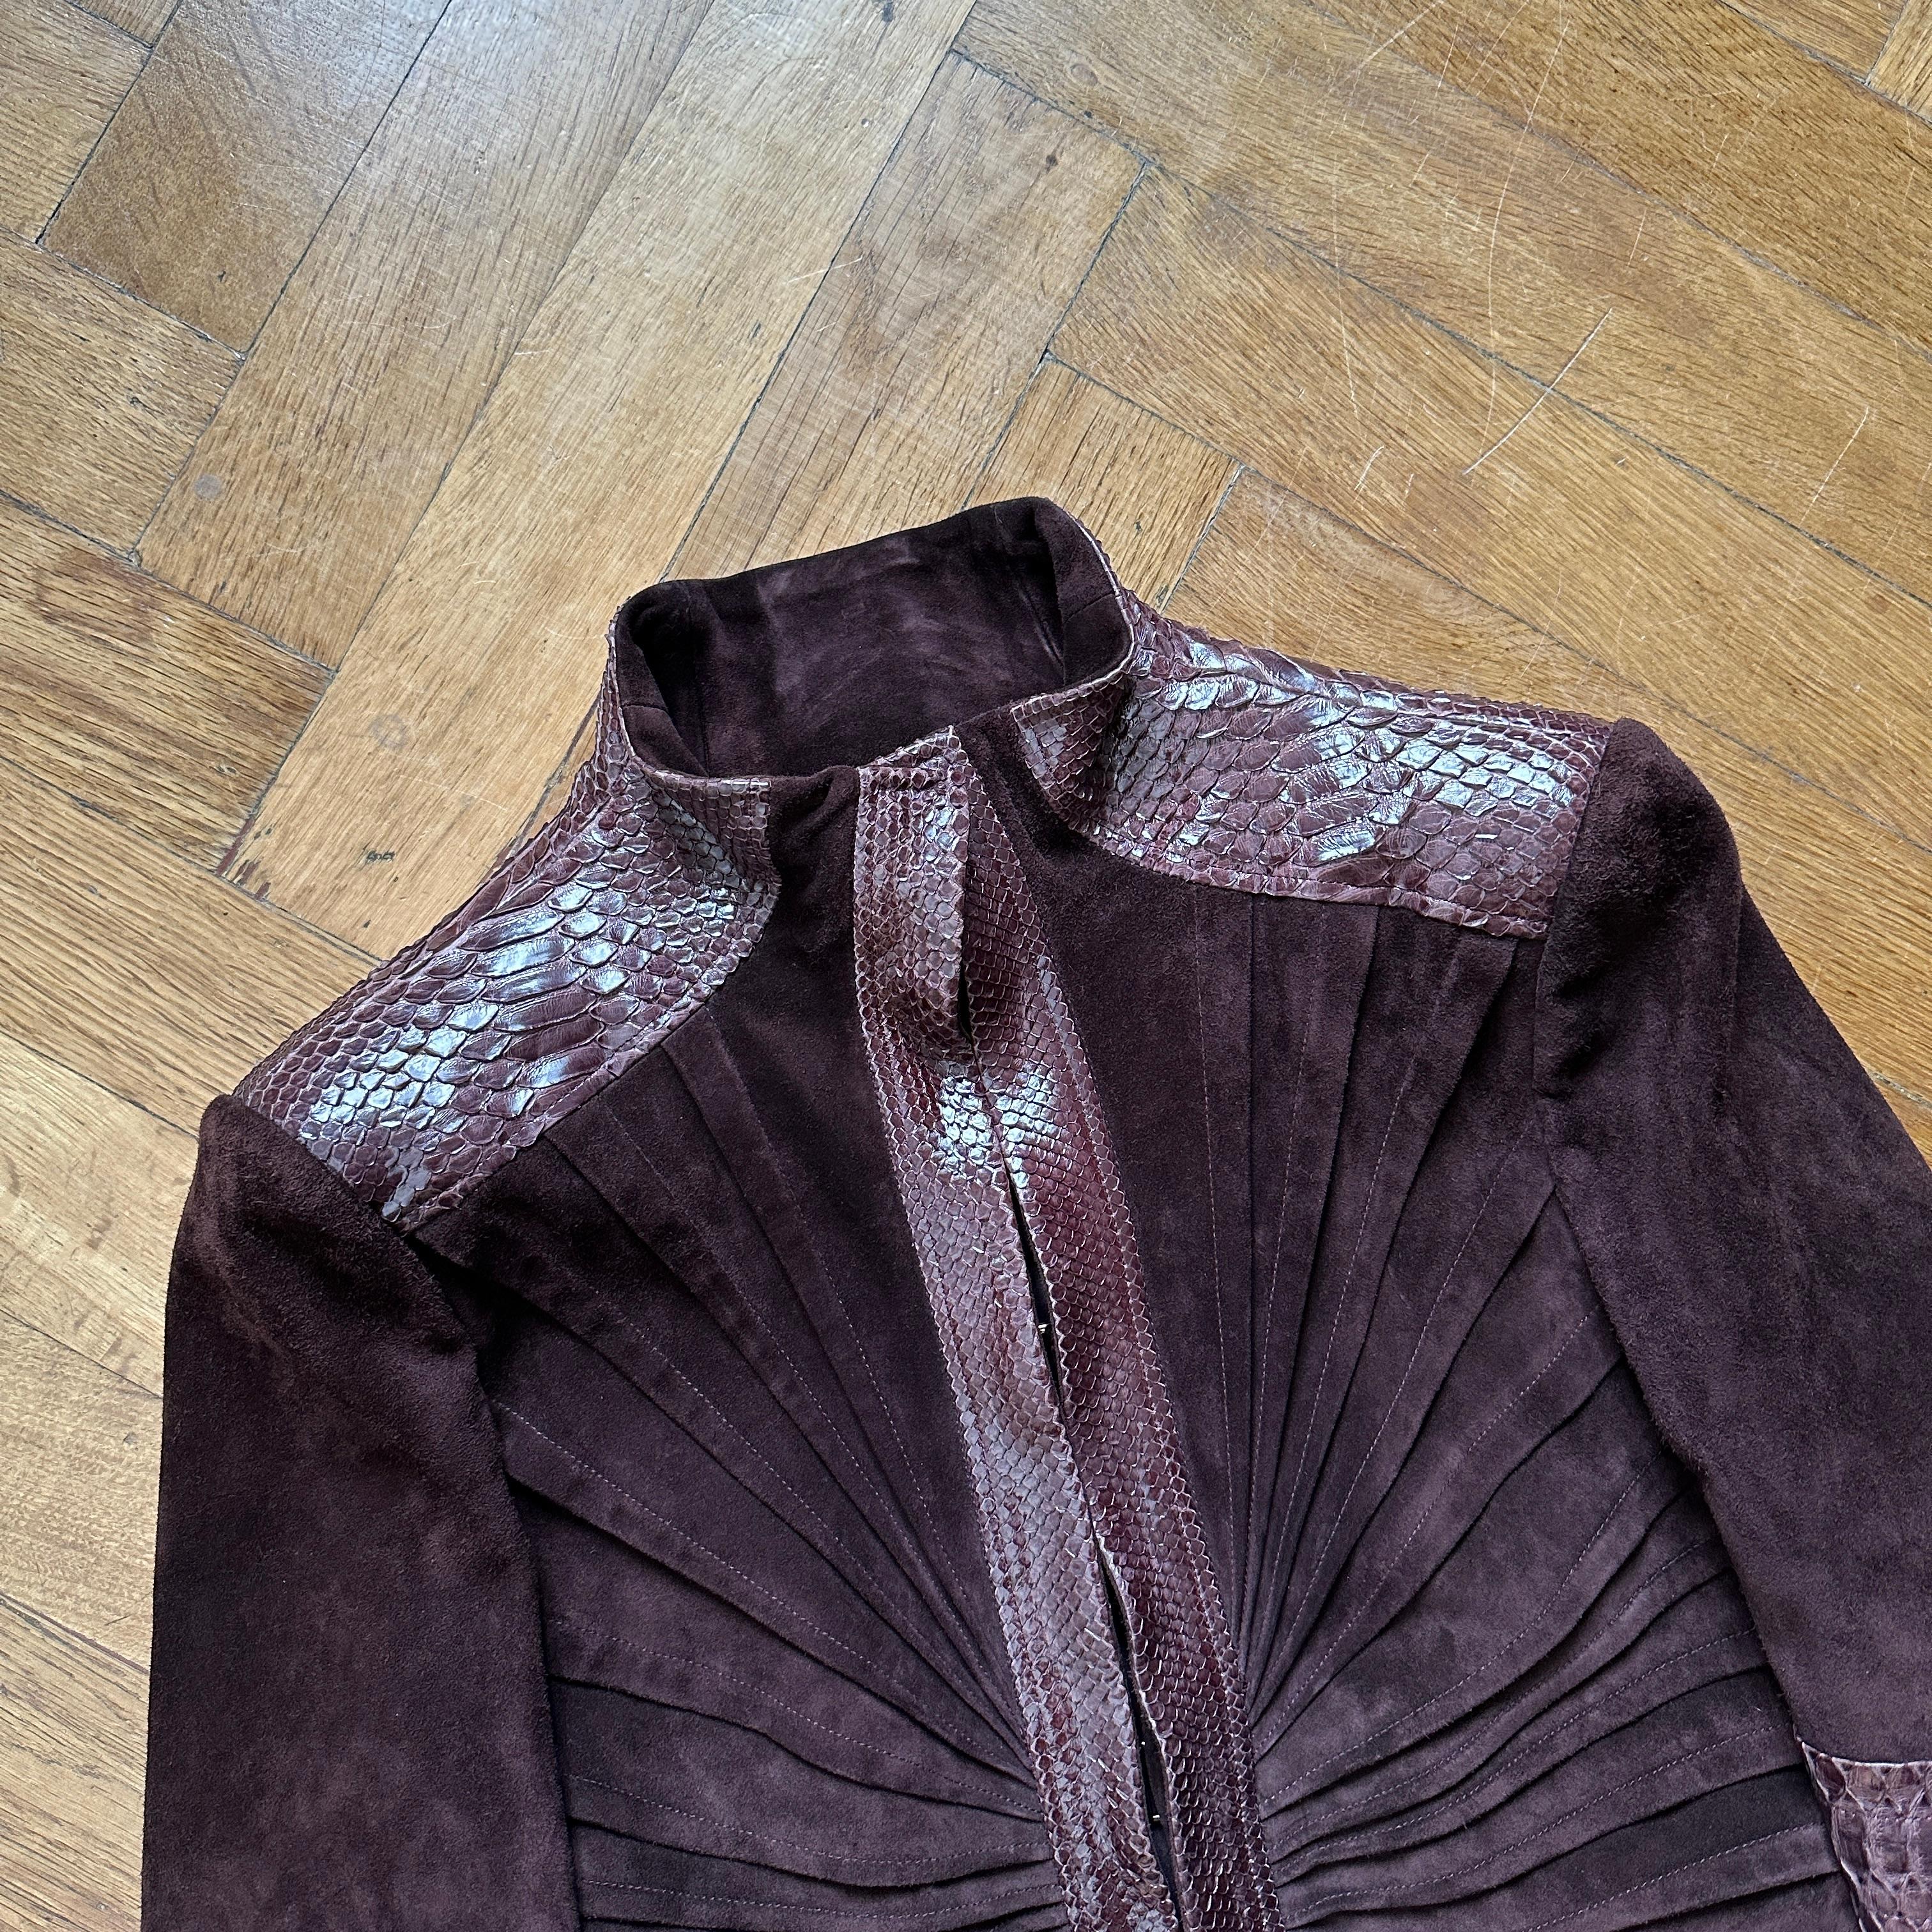 Gucci Python Suede Paneled Jacket from Tom Ford's Spring/Summer 2004 Collection made of beautiful suede leather with real snakeskin panels throughout.

Condition: Great
Colour: Burgundy
Collection: SS 2004

MEASUREMENTS
Shoulder-Width: 40 cm
Chest: